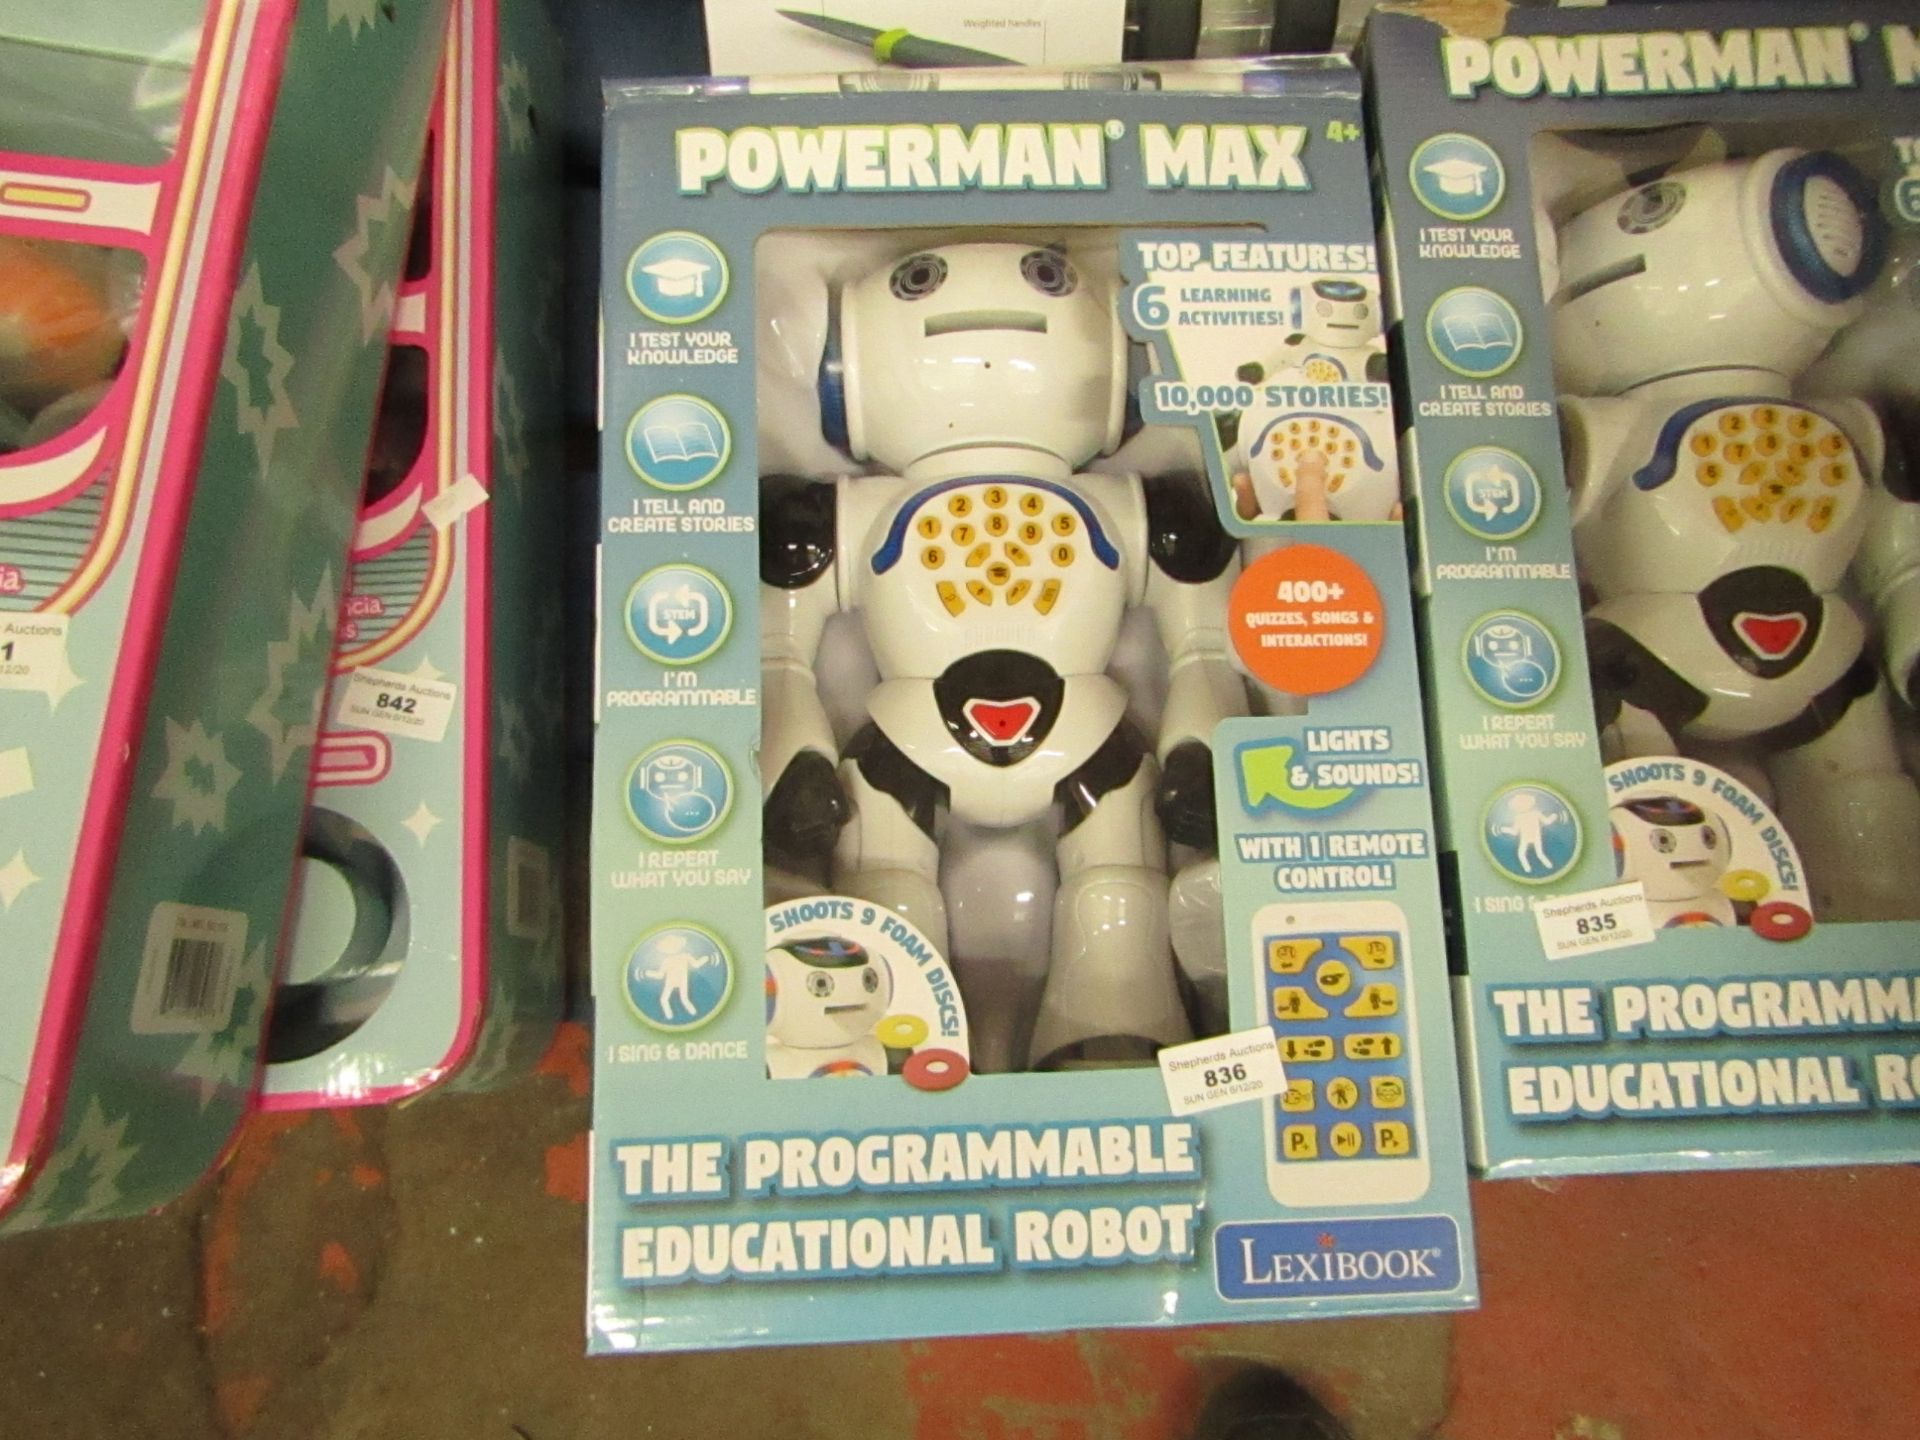 Power man Max programmeable educational robot, unchecked and boxed